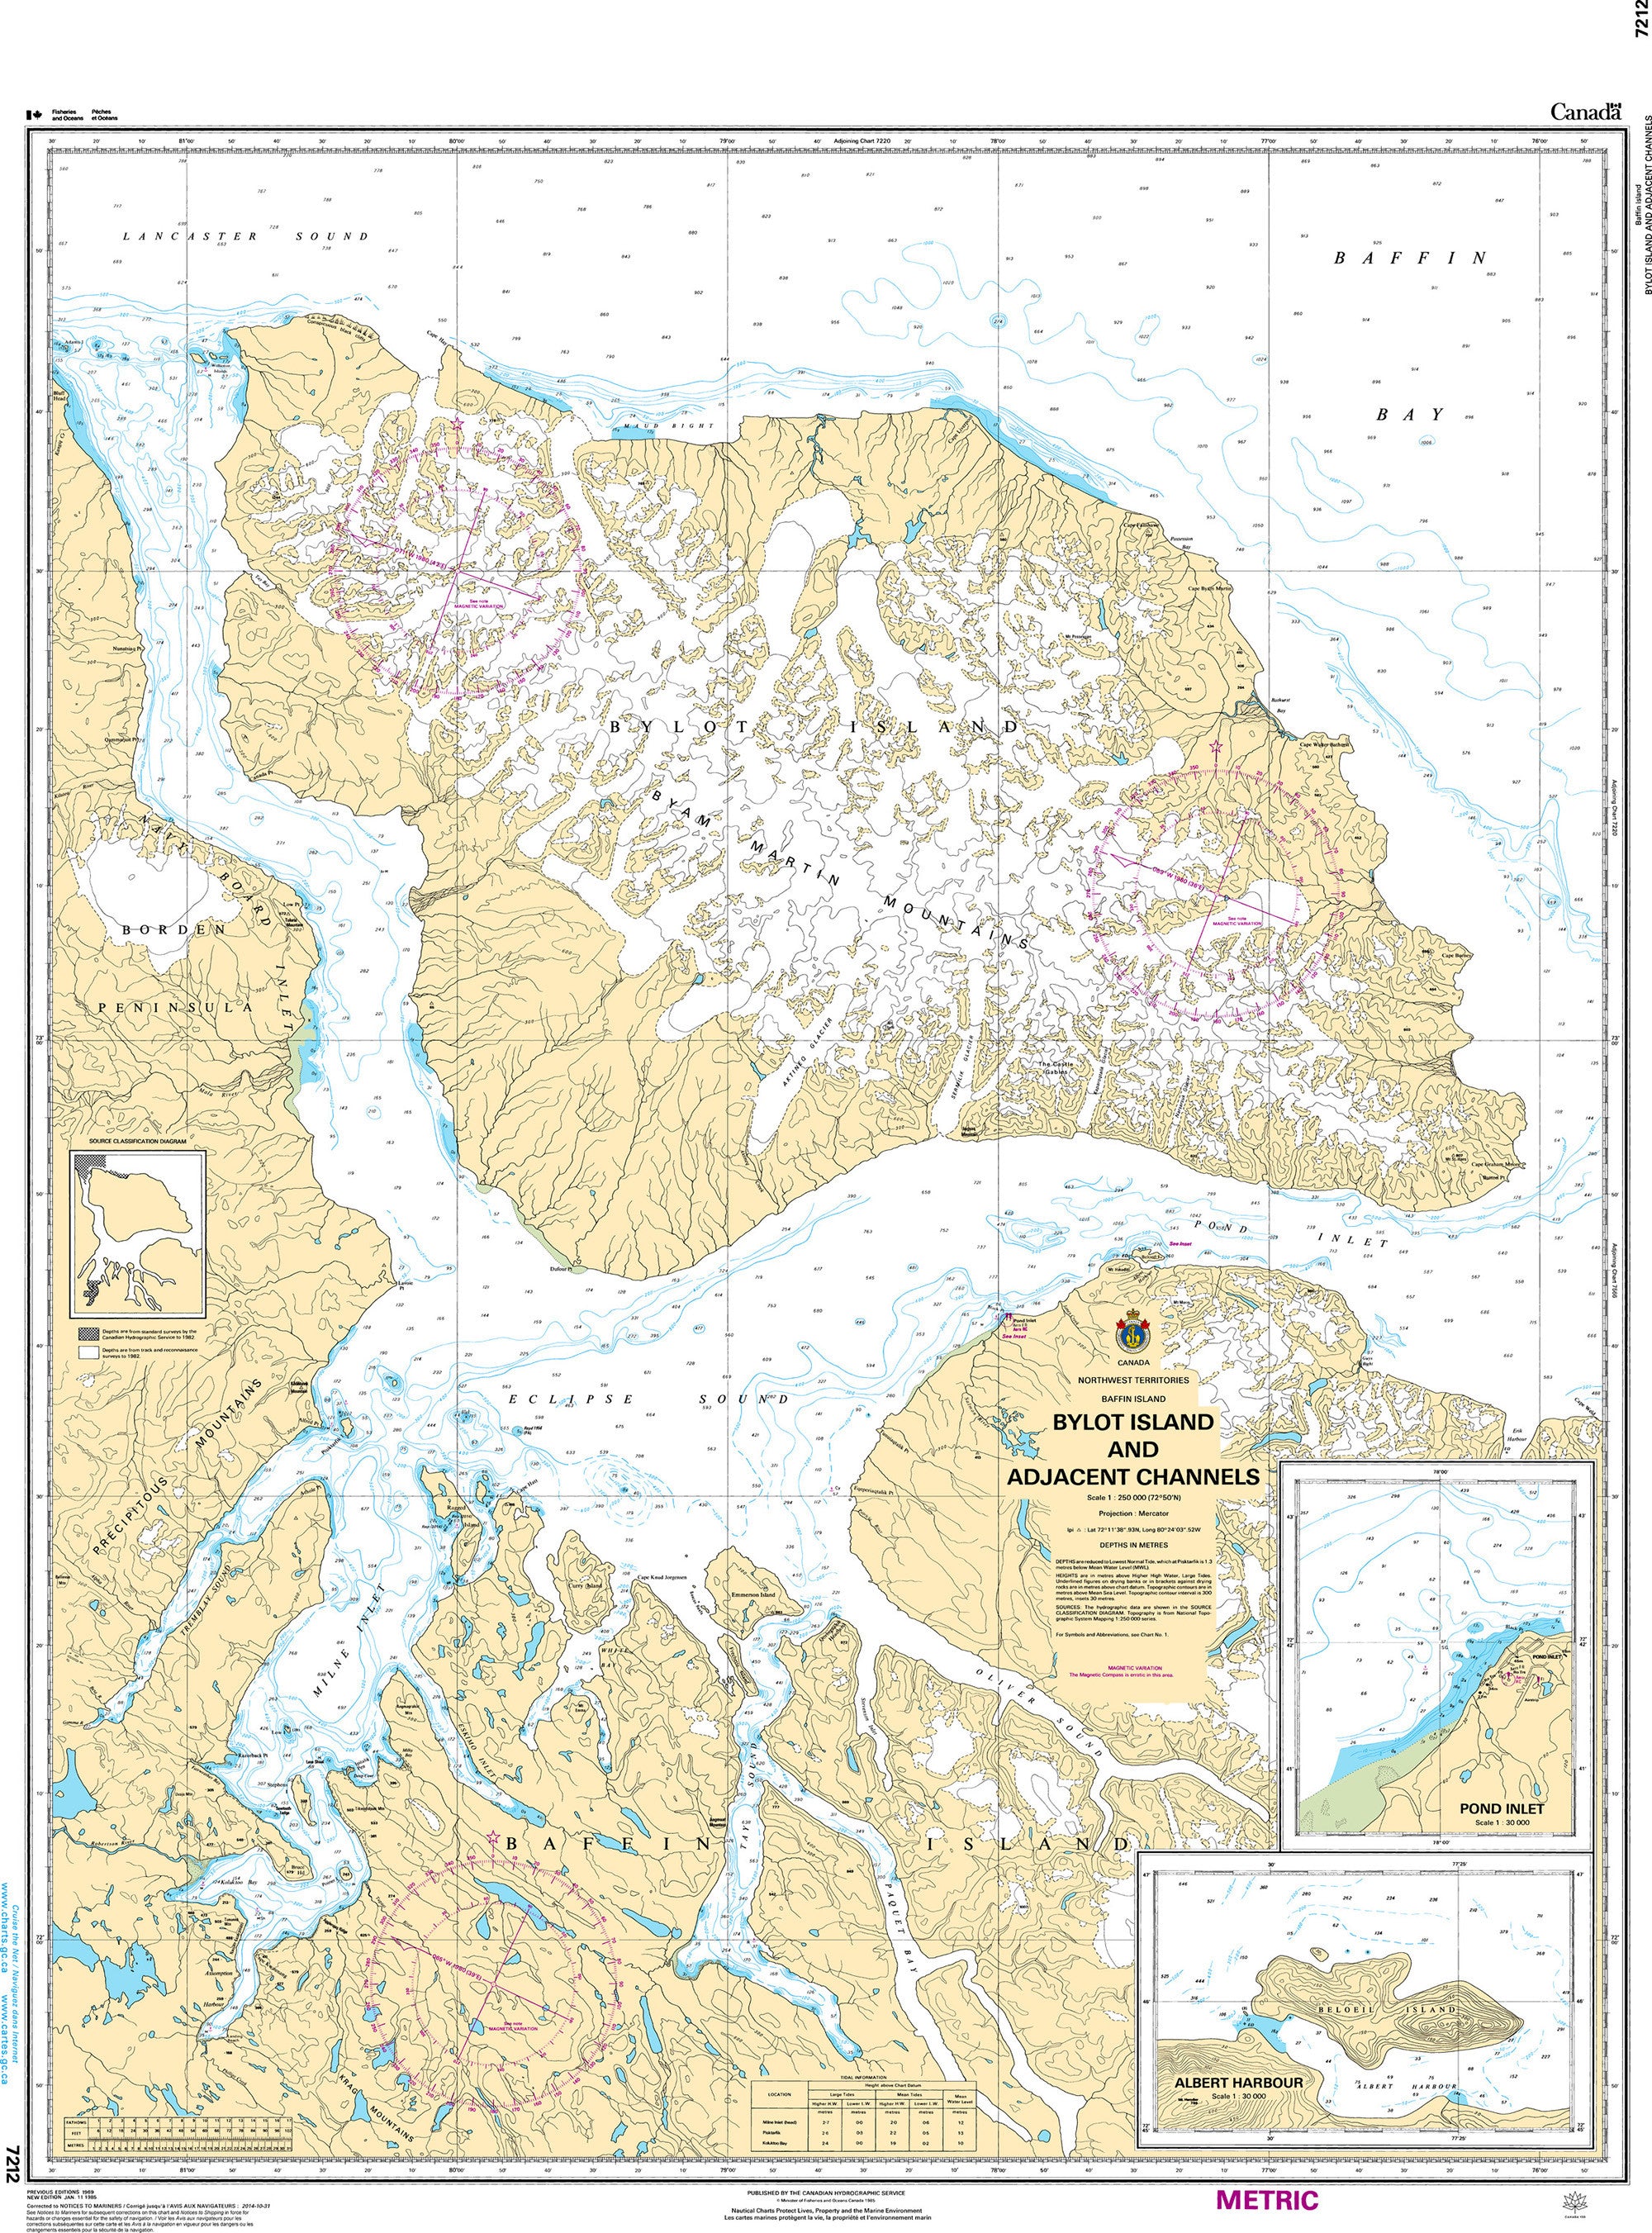 Canadian Hydrographic Service Nautical Chart CHS7212: Bylot Island and Adjacent Channels